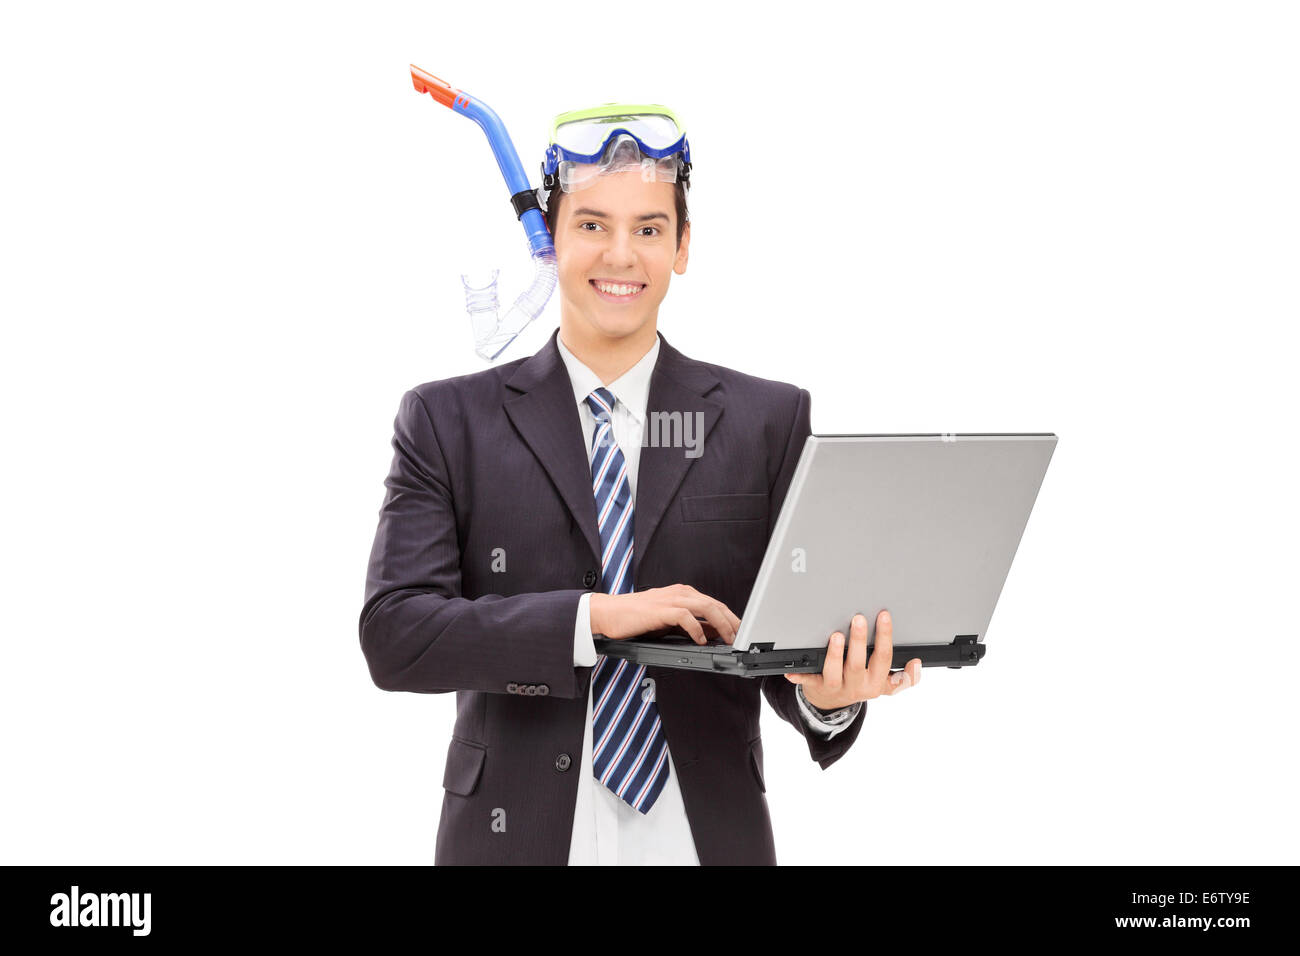 Businessman with diving equipment holding laptop isolated on white background Stock Photo